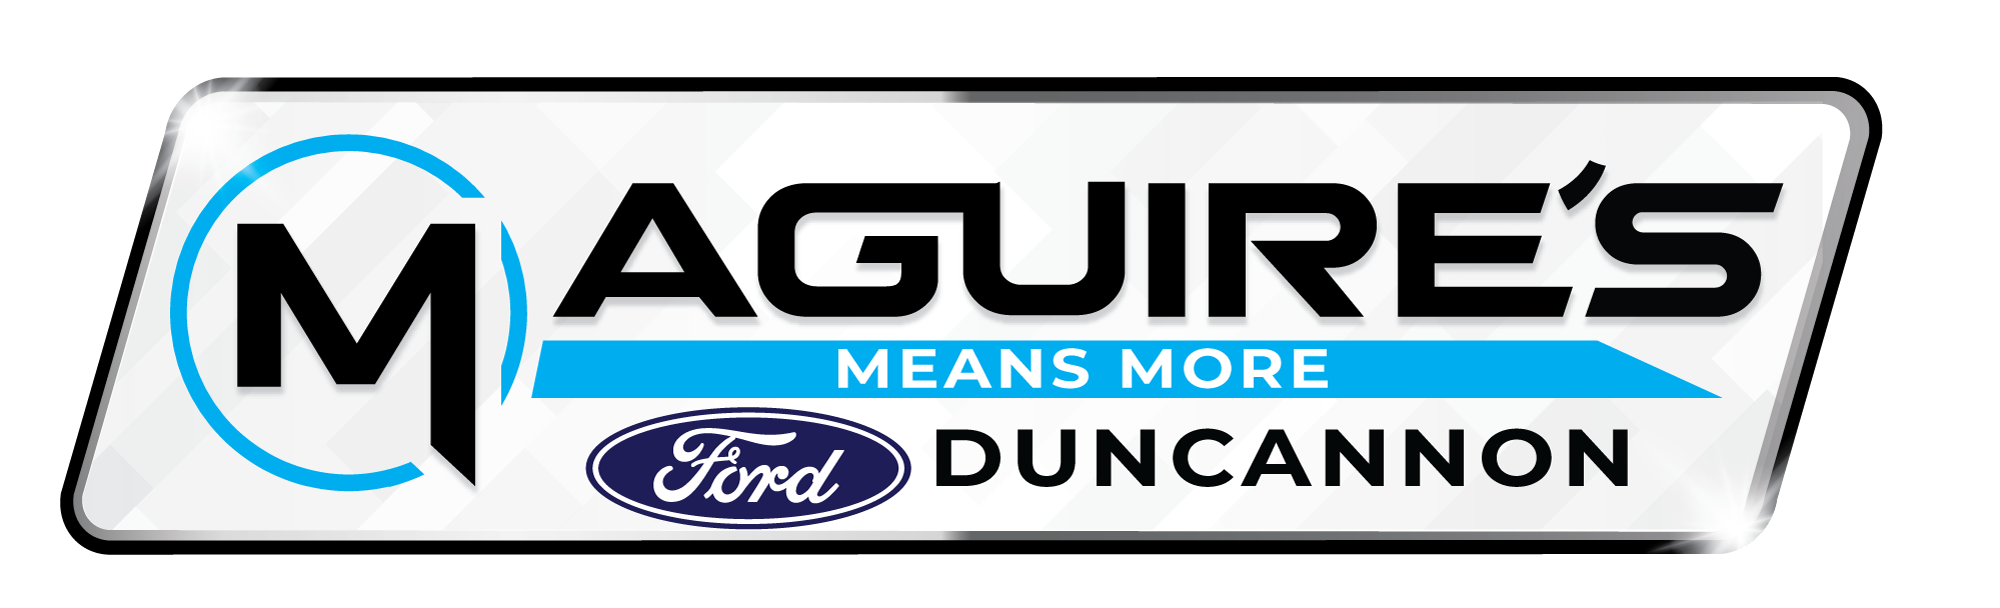 Maguire's Ford, Inc. Duncannon, PA